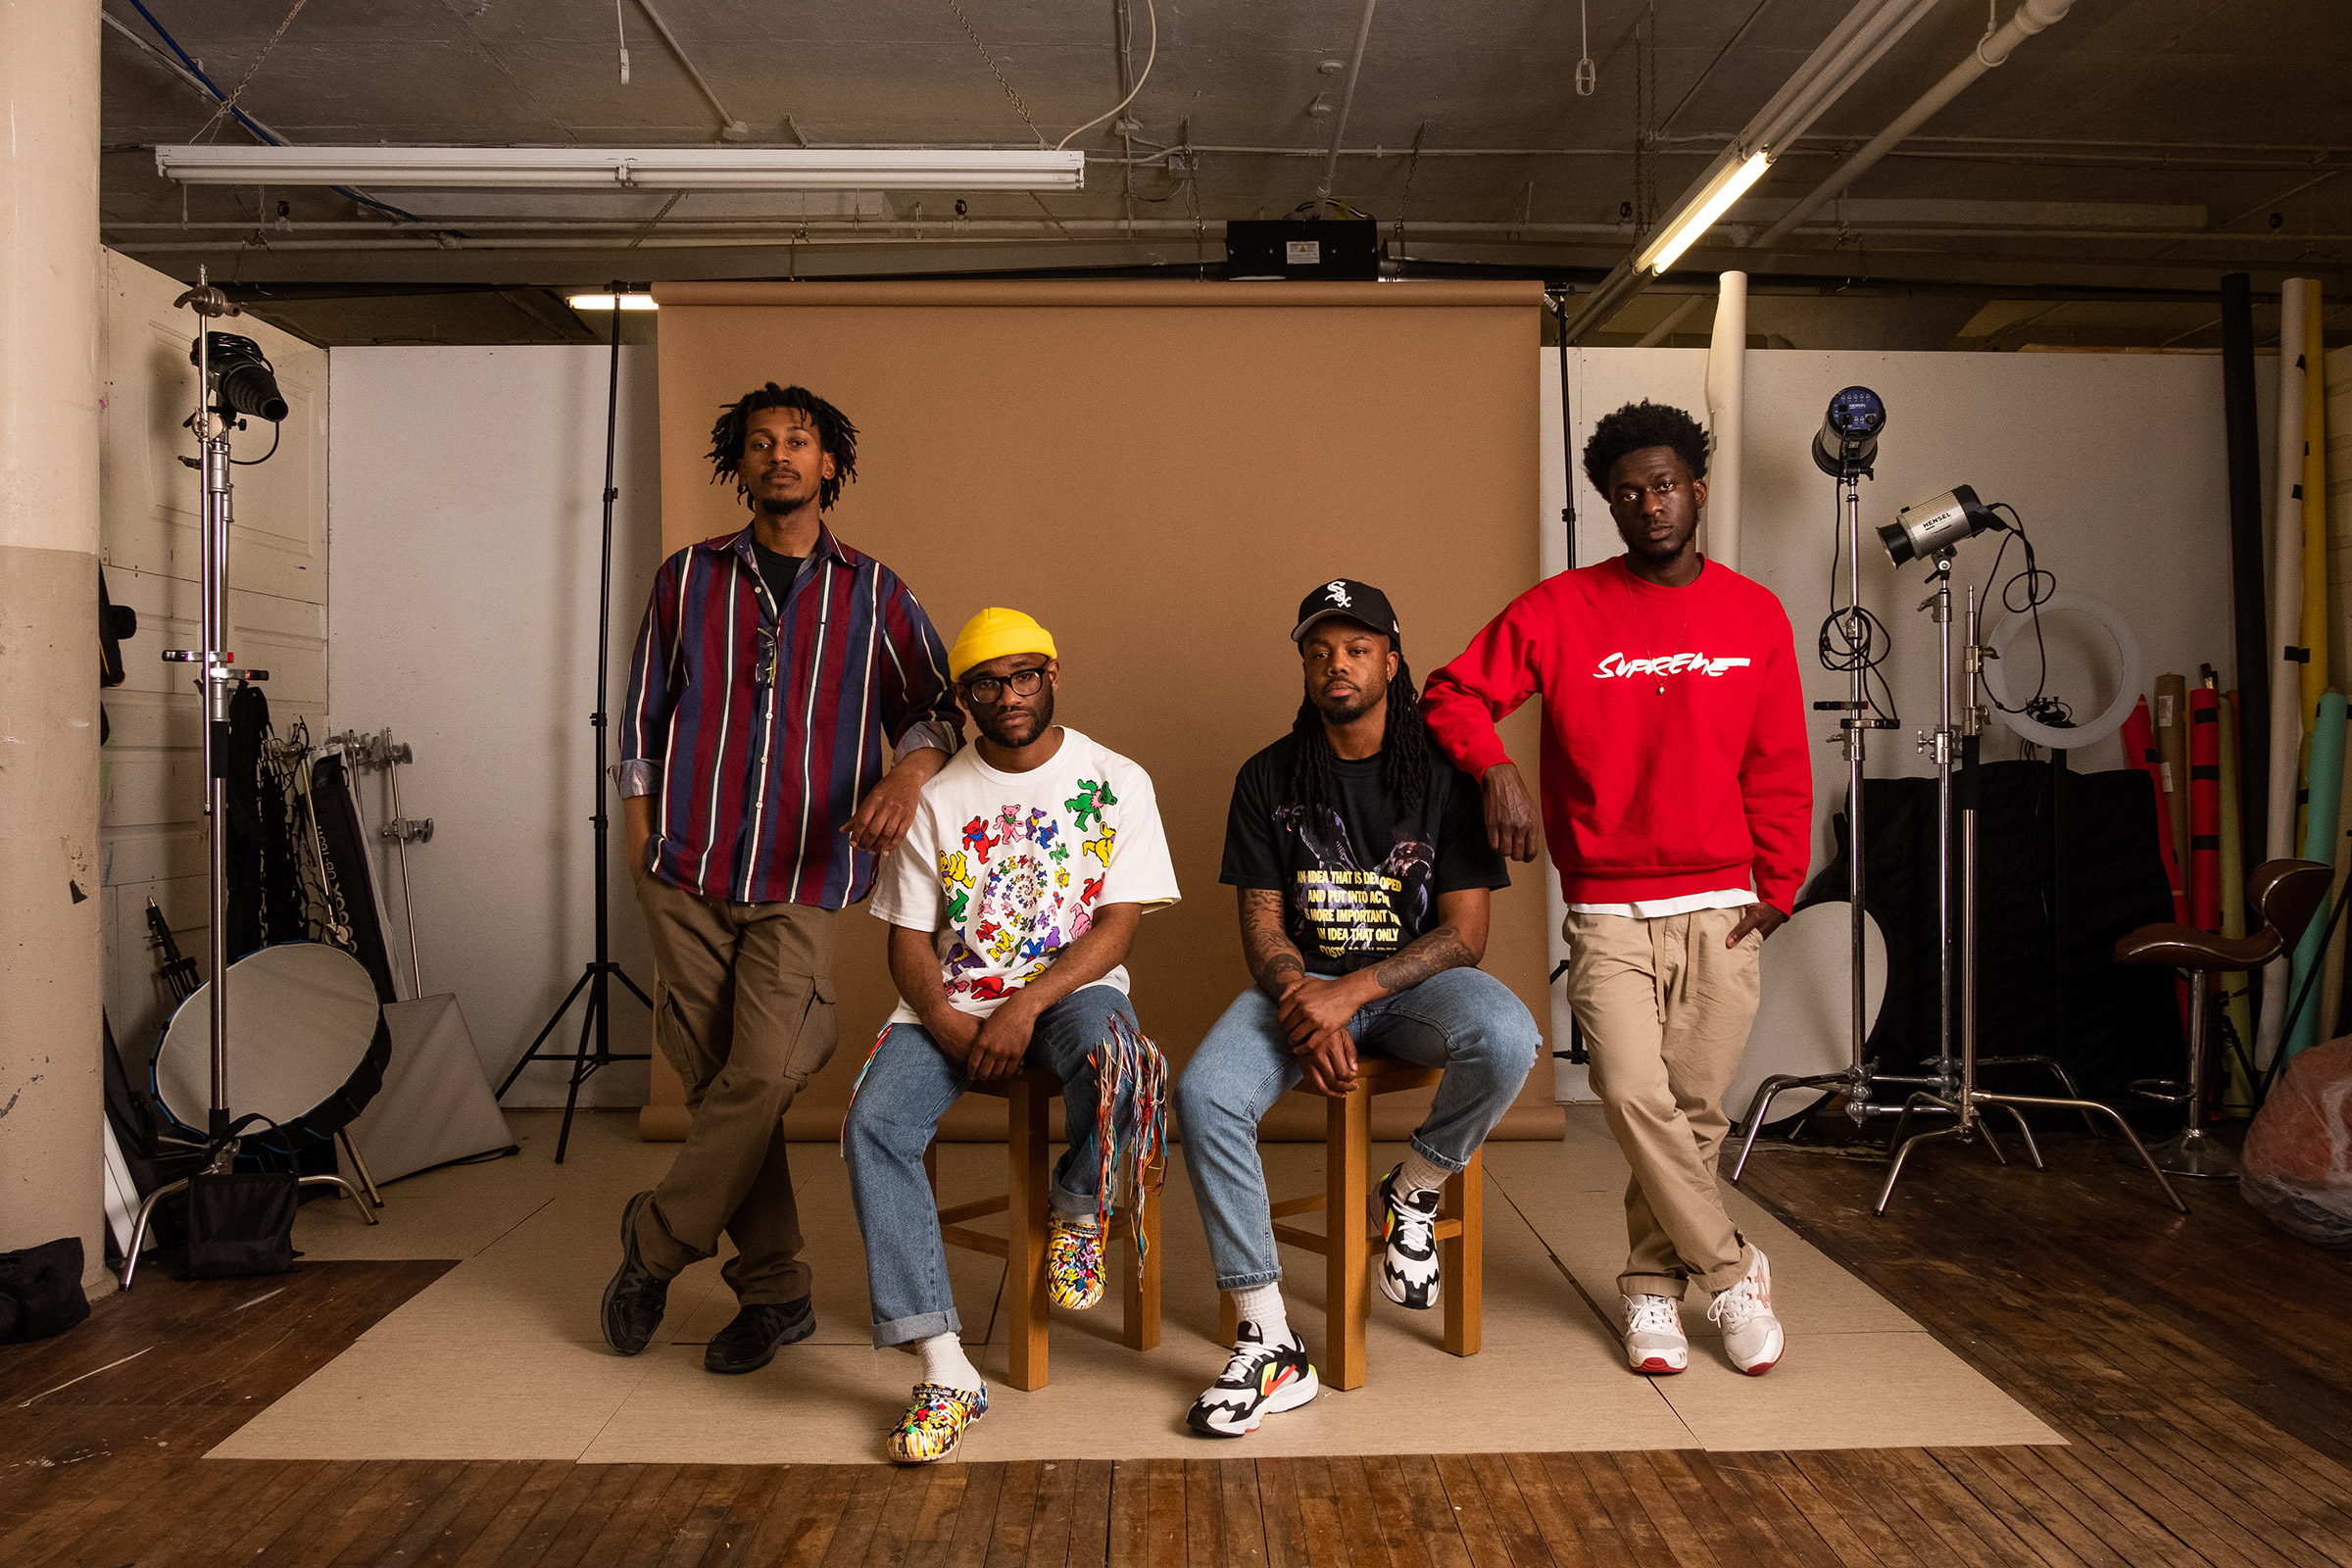 From left, Adrian Javon, Malik Rainey, Derrick Carr and Brandon Watson at their studio in Buffalo, N.Y., on May 5. (Photograph created in collaboration between Derrick Carr, Adrian Javon, Malik Rainey, Joshua Thermidor and Brandon Watson for TIME)